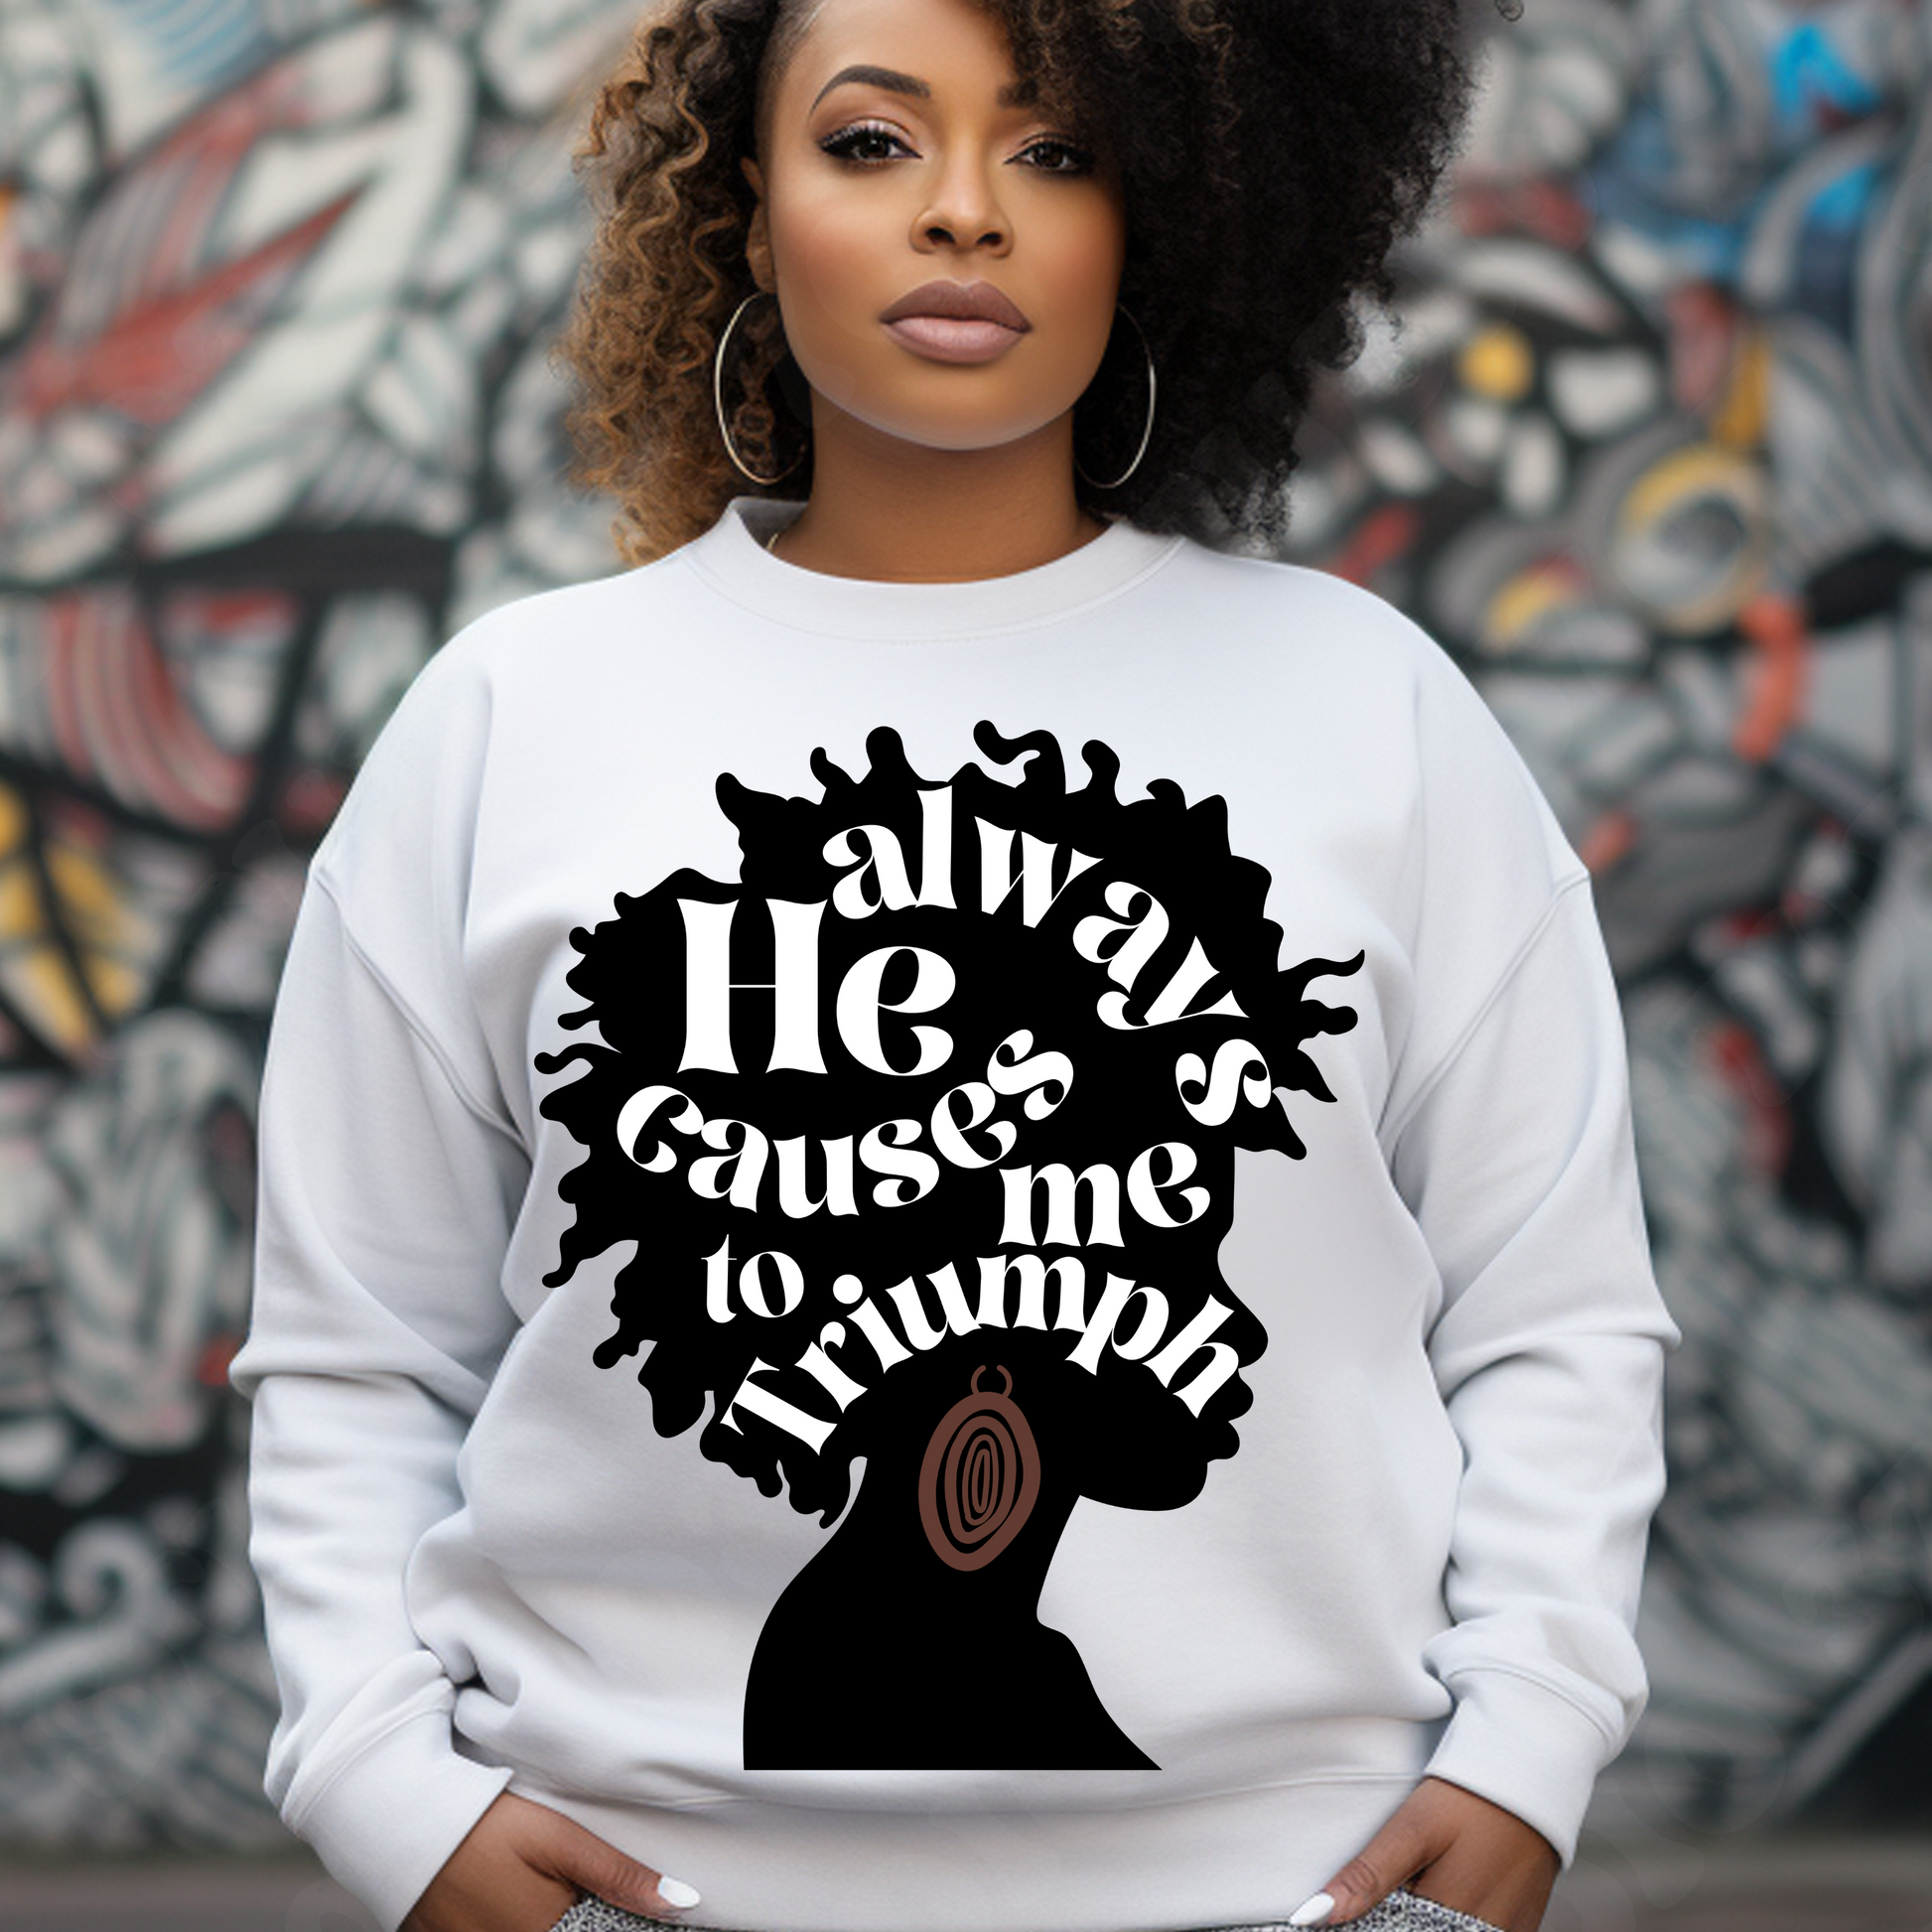 Triumph Tees Faith Apparel: Inspiring white sweatshirt with 'He always causes me to triumph' design. Elevate your style with this faith-inspired Triumph Tees white sweatshirt. Perfect for spreading positivity and celebrating black history. #TriumphTees #FaithApparel #BlackHistoryShirt